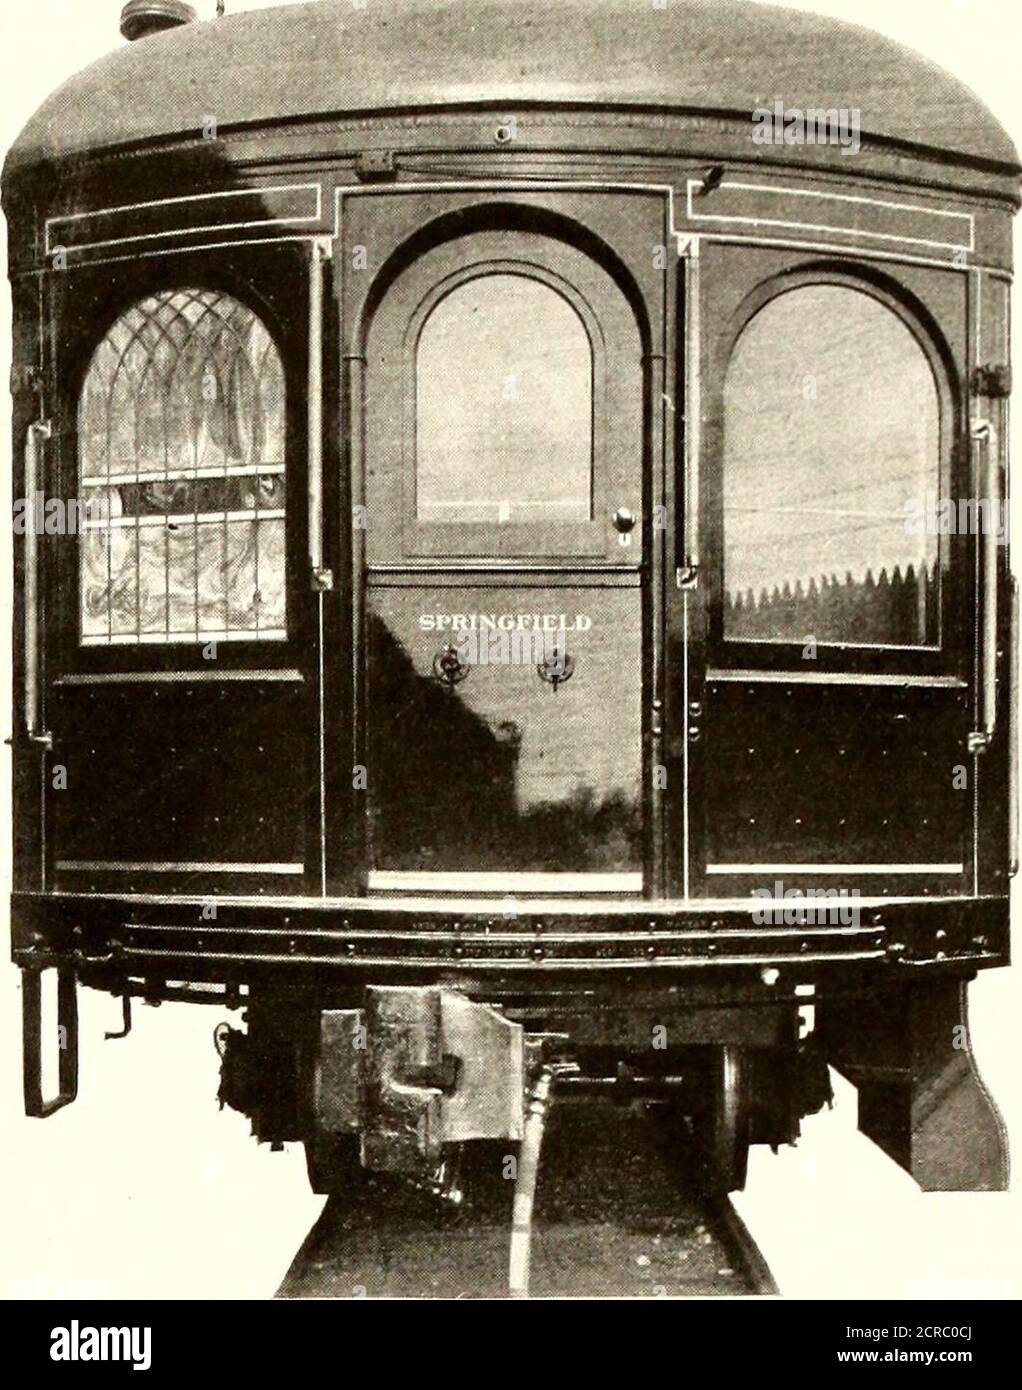 . Electric railway journal . Tight-Lock Type Coupler with Air Connections onSuburban Car M. C. B. Coupler with Deep-Face Knuckle cars. In general, the operation of coupling is ef-fected by the action of a wedge or hook againstwhich a lock is forced transversely, and as a resultall lost motion is taken up and no opportunity ex-ists for the two coupler faces to work transverselyupon one another. The air connections are madeby lining up openings in the faces of the couplersthat are fitted with rubber gaskets, leakage beingprevented by the pressure with which the gasketsare held together. Electric Stock Photo